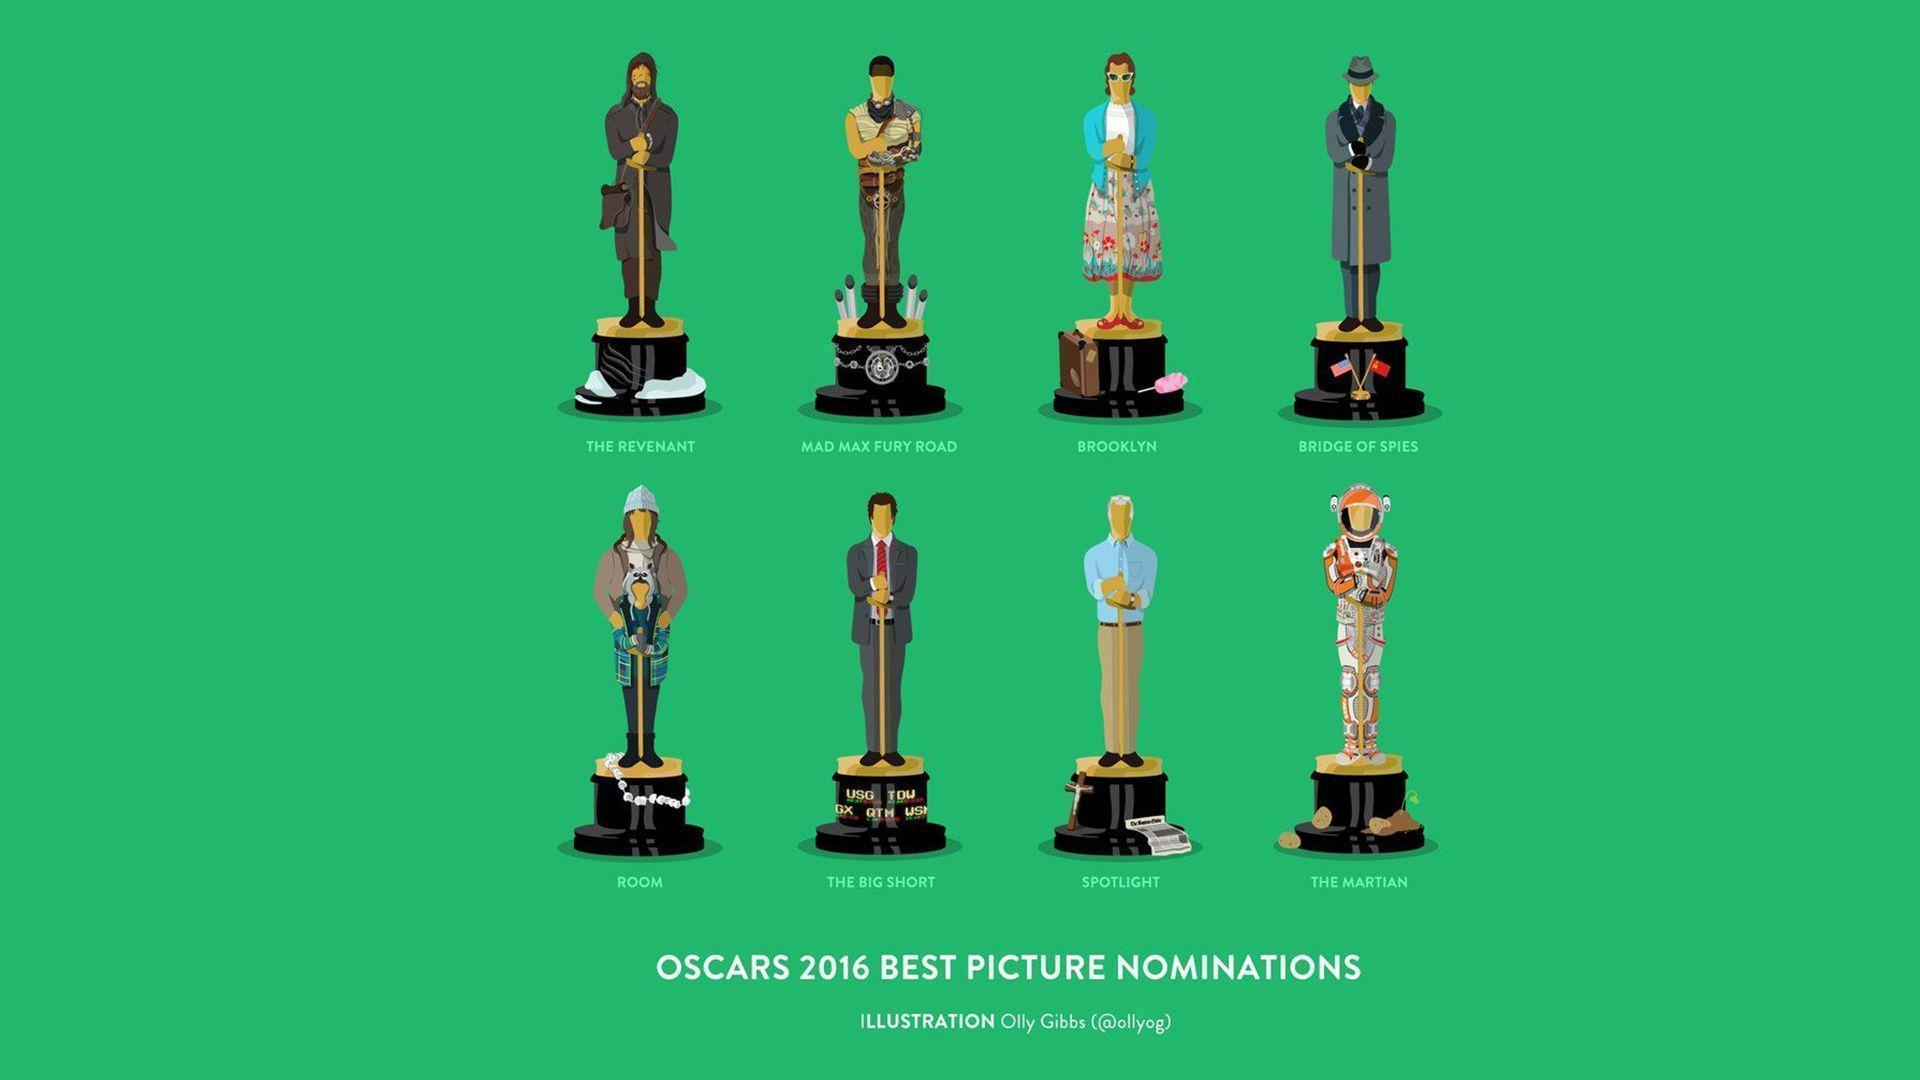 Oscars 2016 Best Picture Nominations wallpaper HD 2016 in Movies